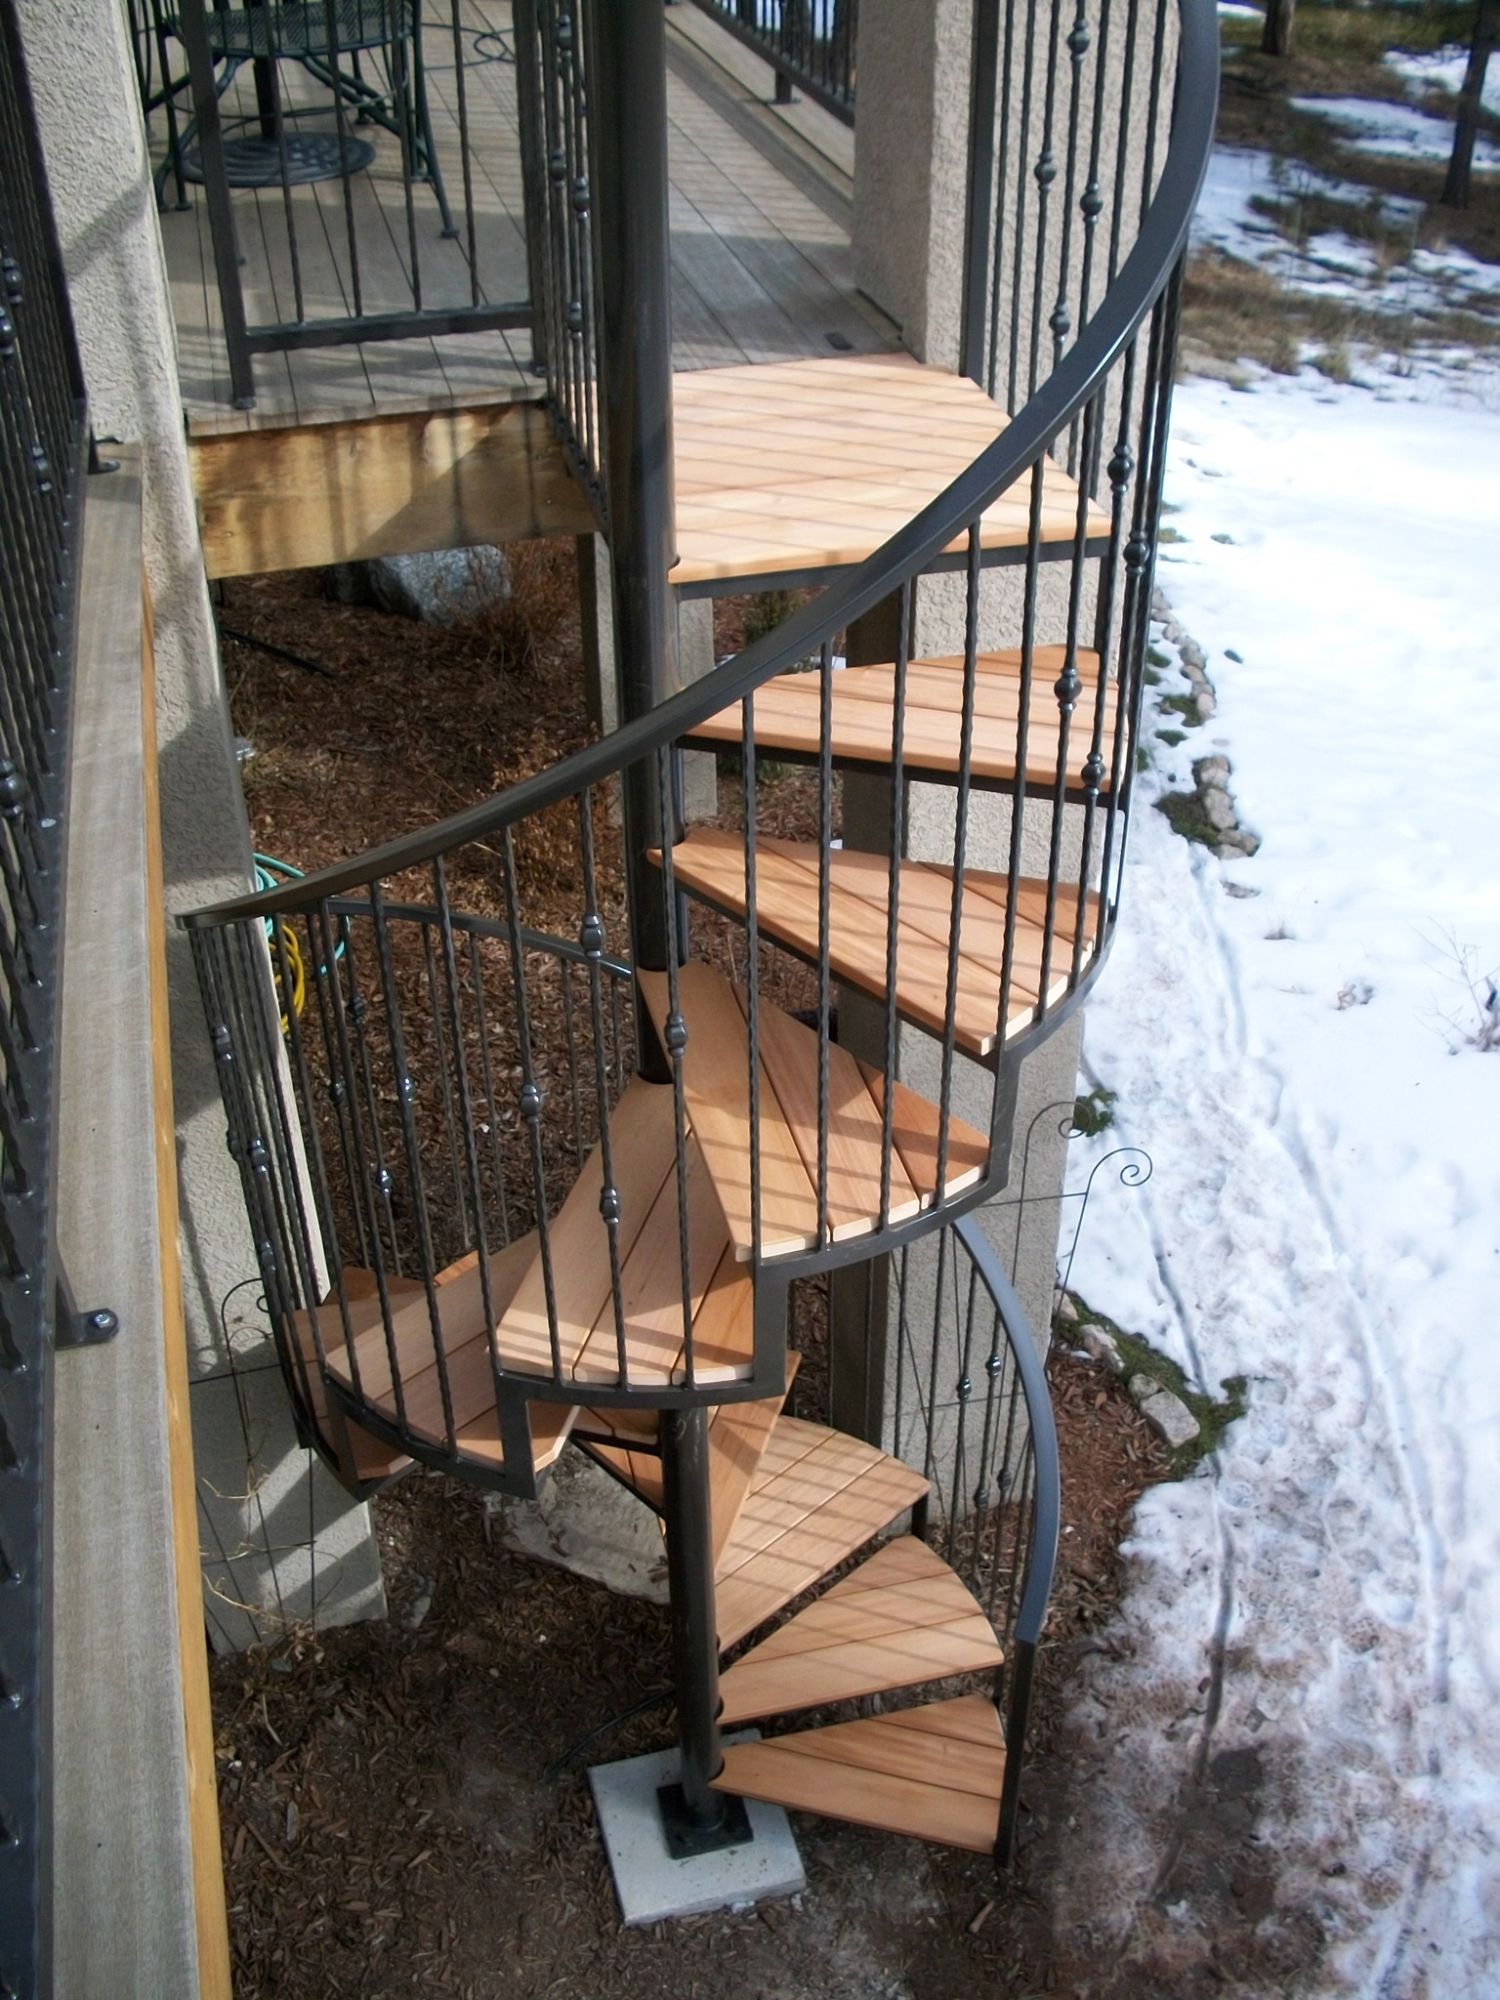 Wrought iron spiral staircase for a deck with hardwood step treads.